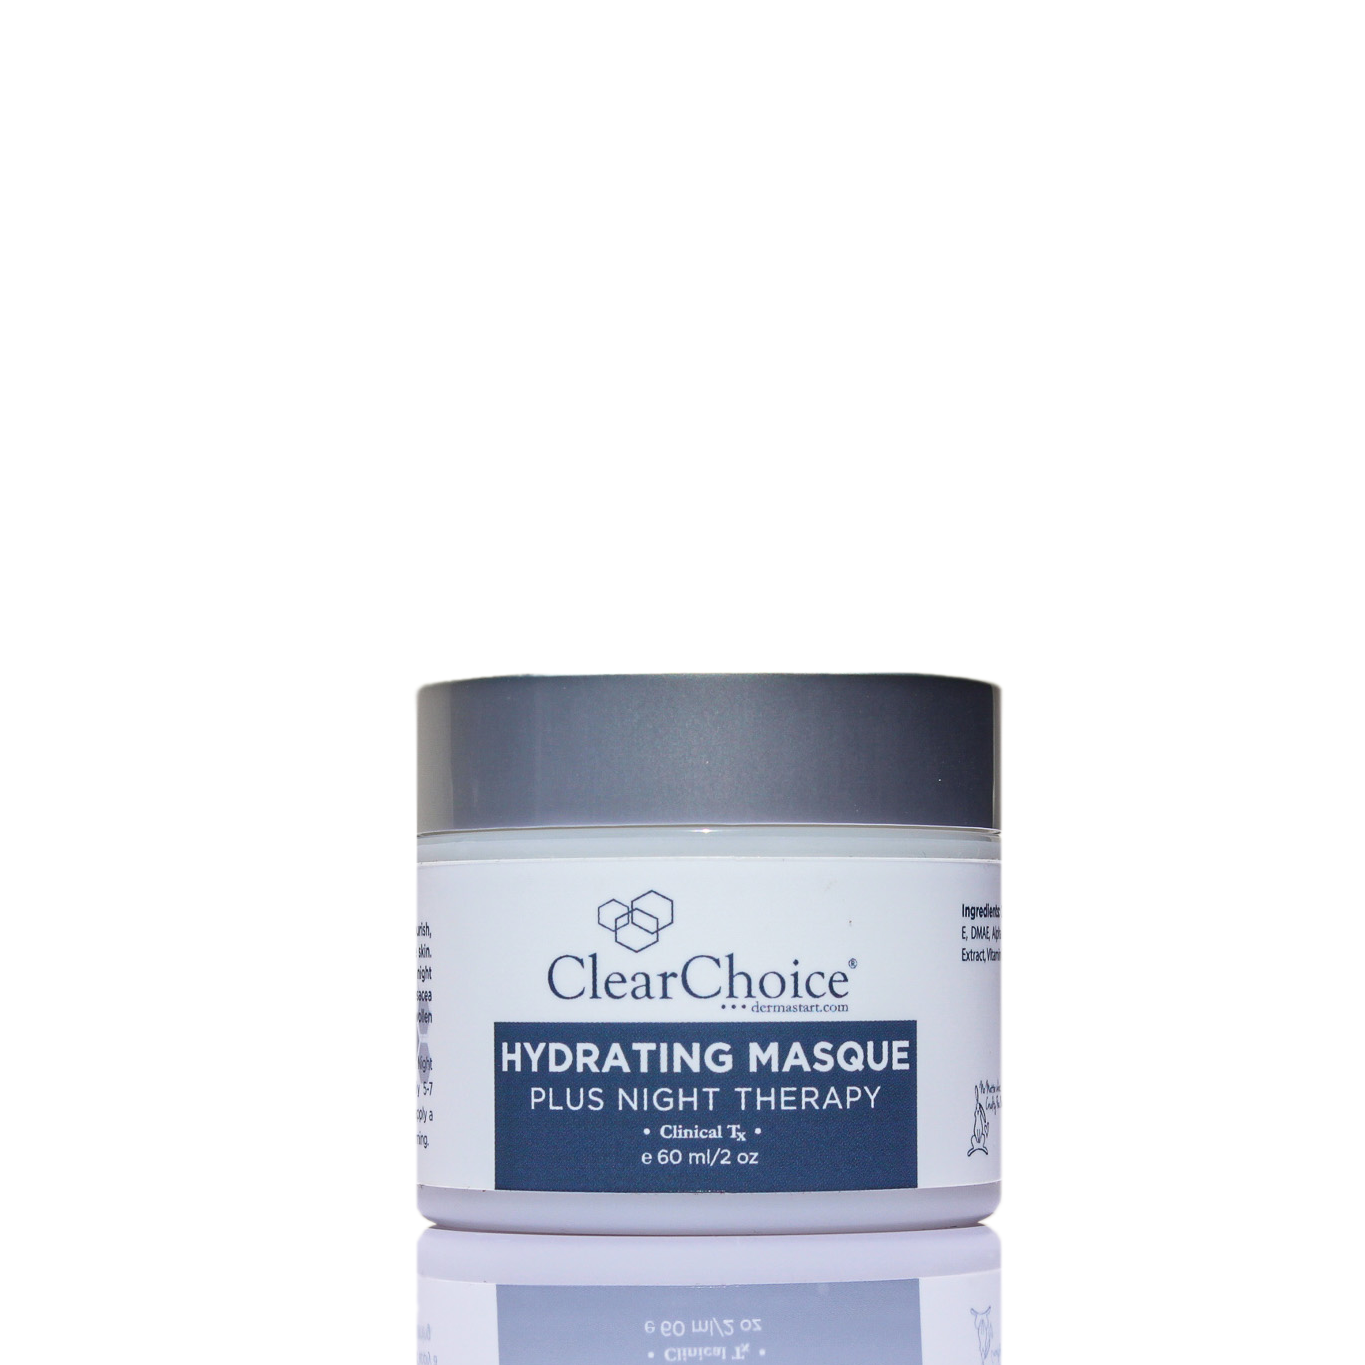 Hydrating Masque + Night Therapy